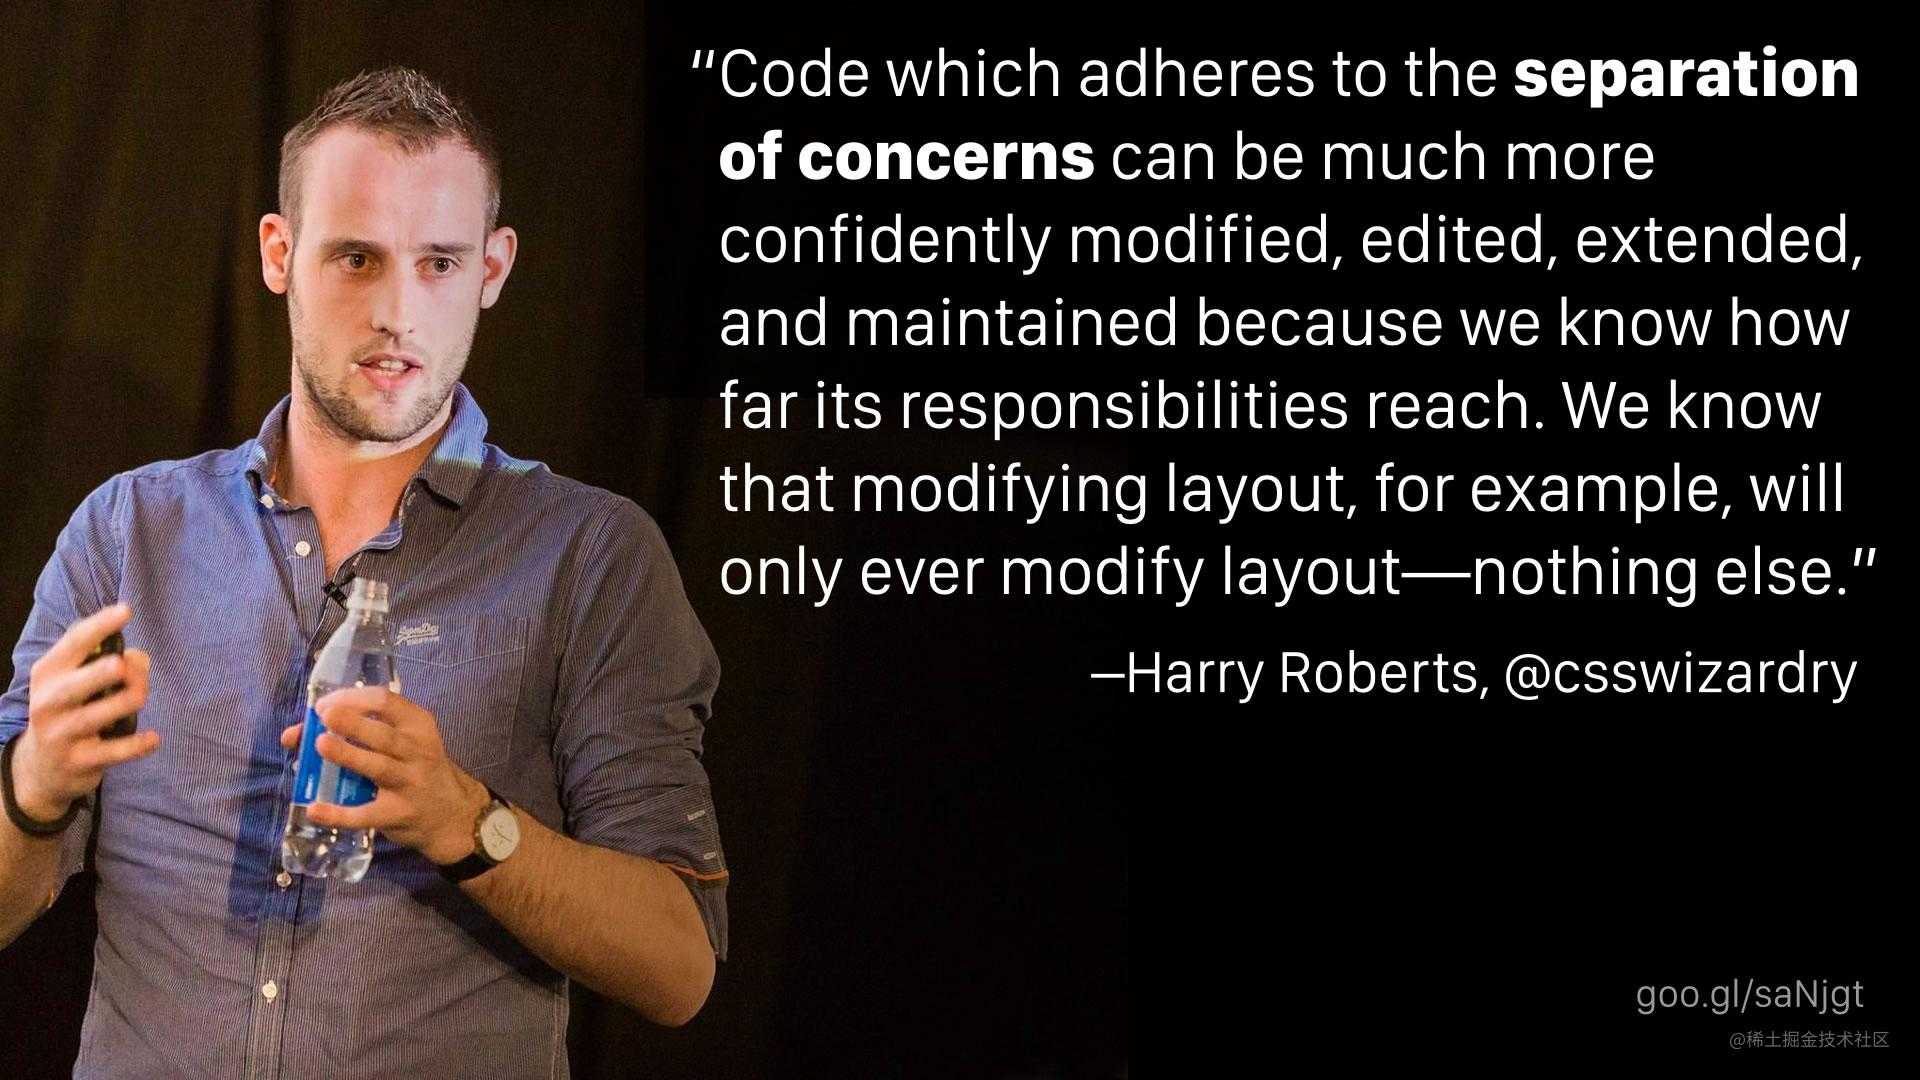 “Code which adheres to the separation of concerns can be much more confidently modified, edited, extended, and maintained because we know how far its responsibilities reach. We know that modifying layout, for example, will only ever modify layout—nothing else.” —Harry Roberts